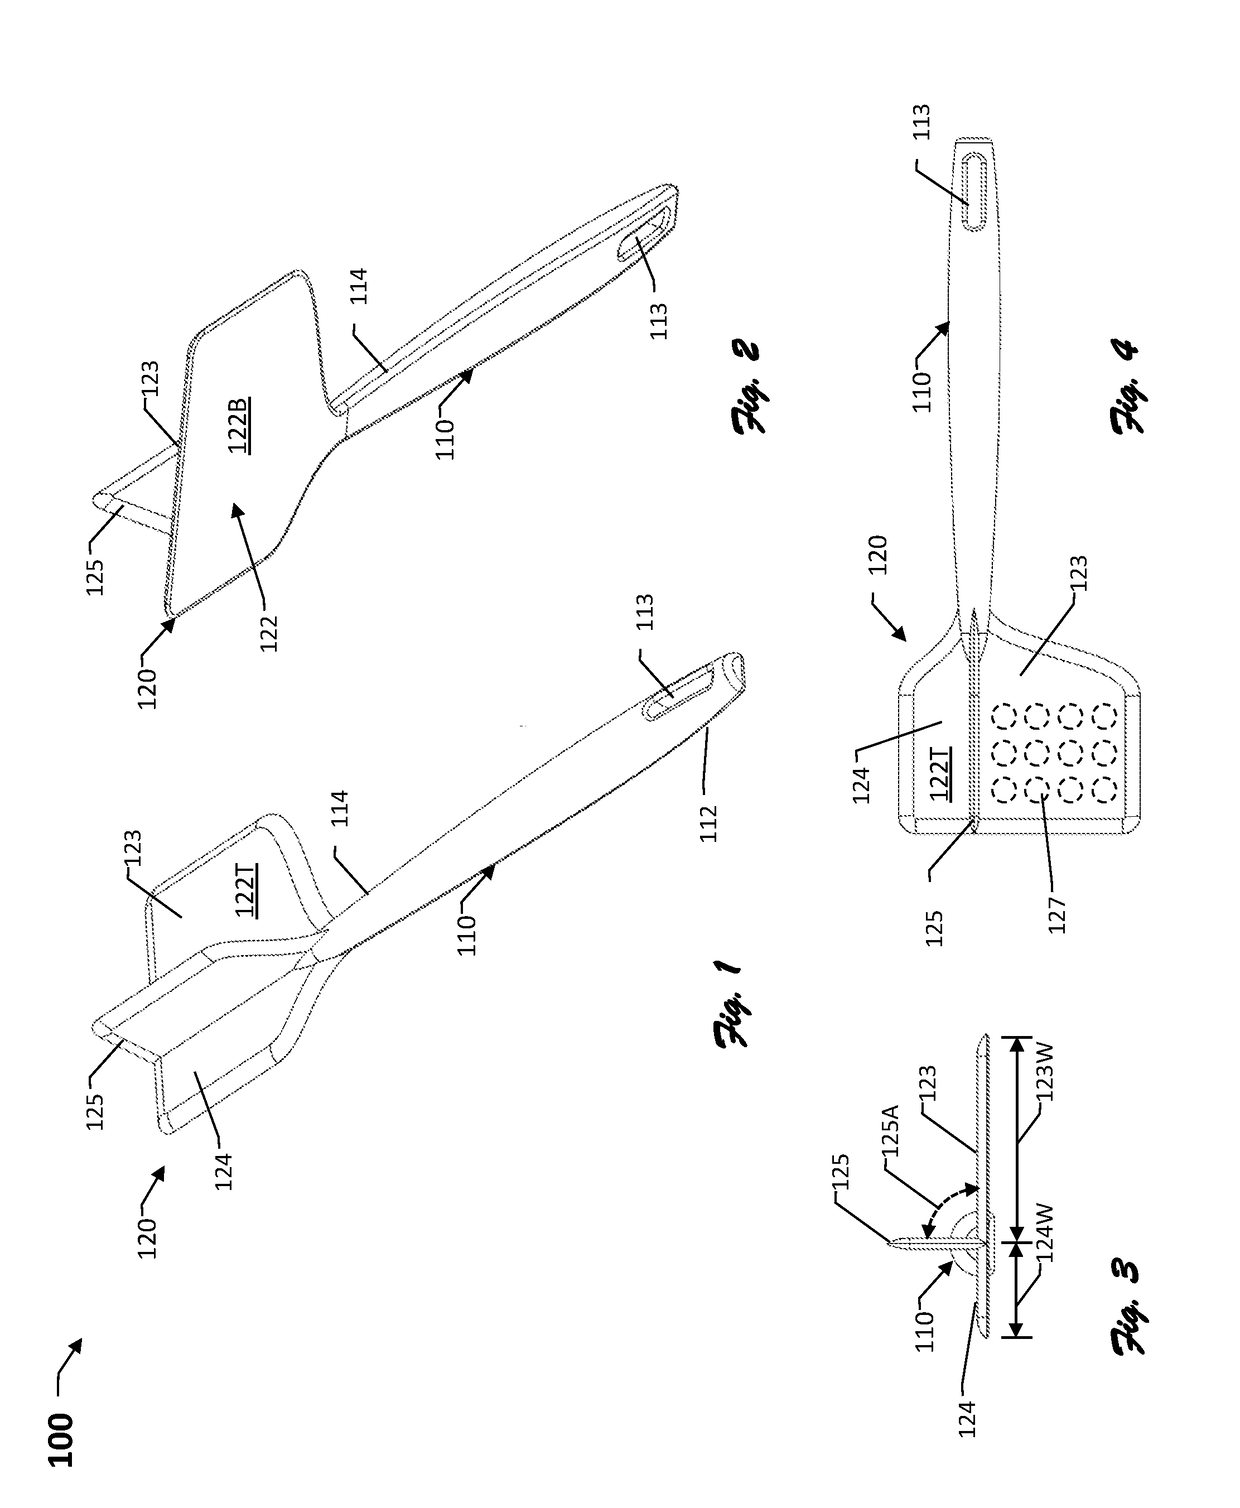 Device for Chopping, Turning, and Serving Ground Meat